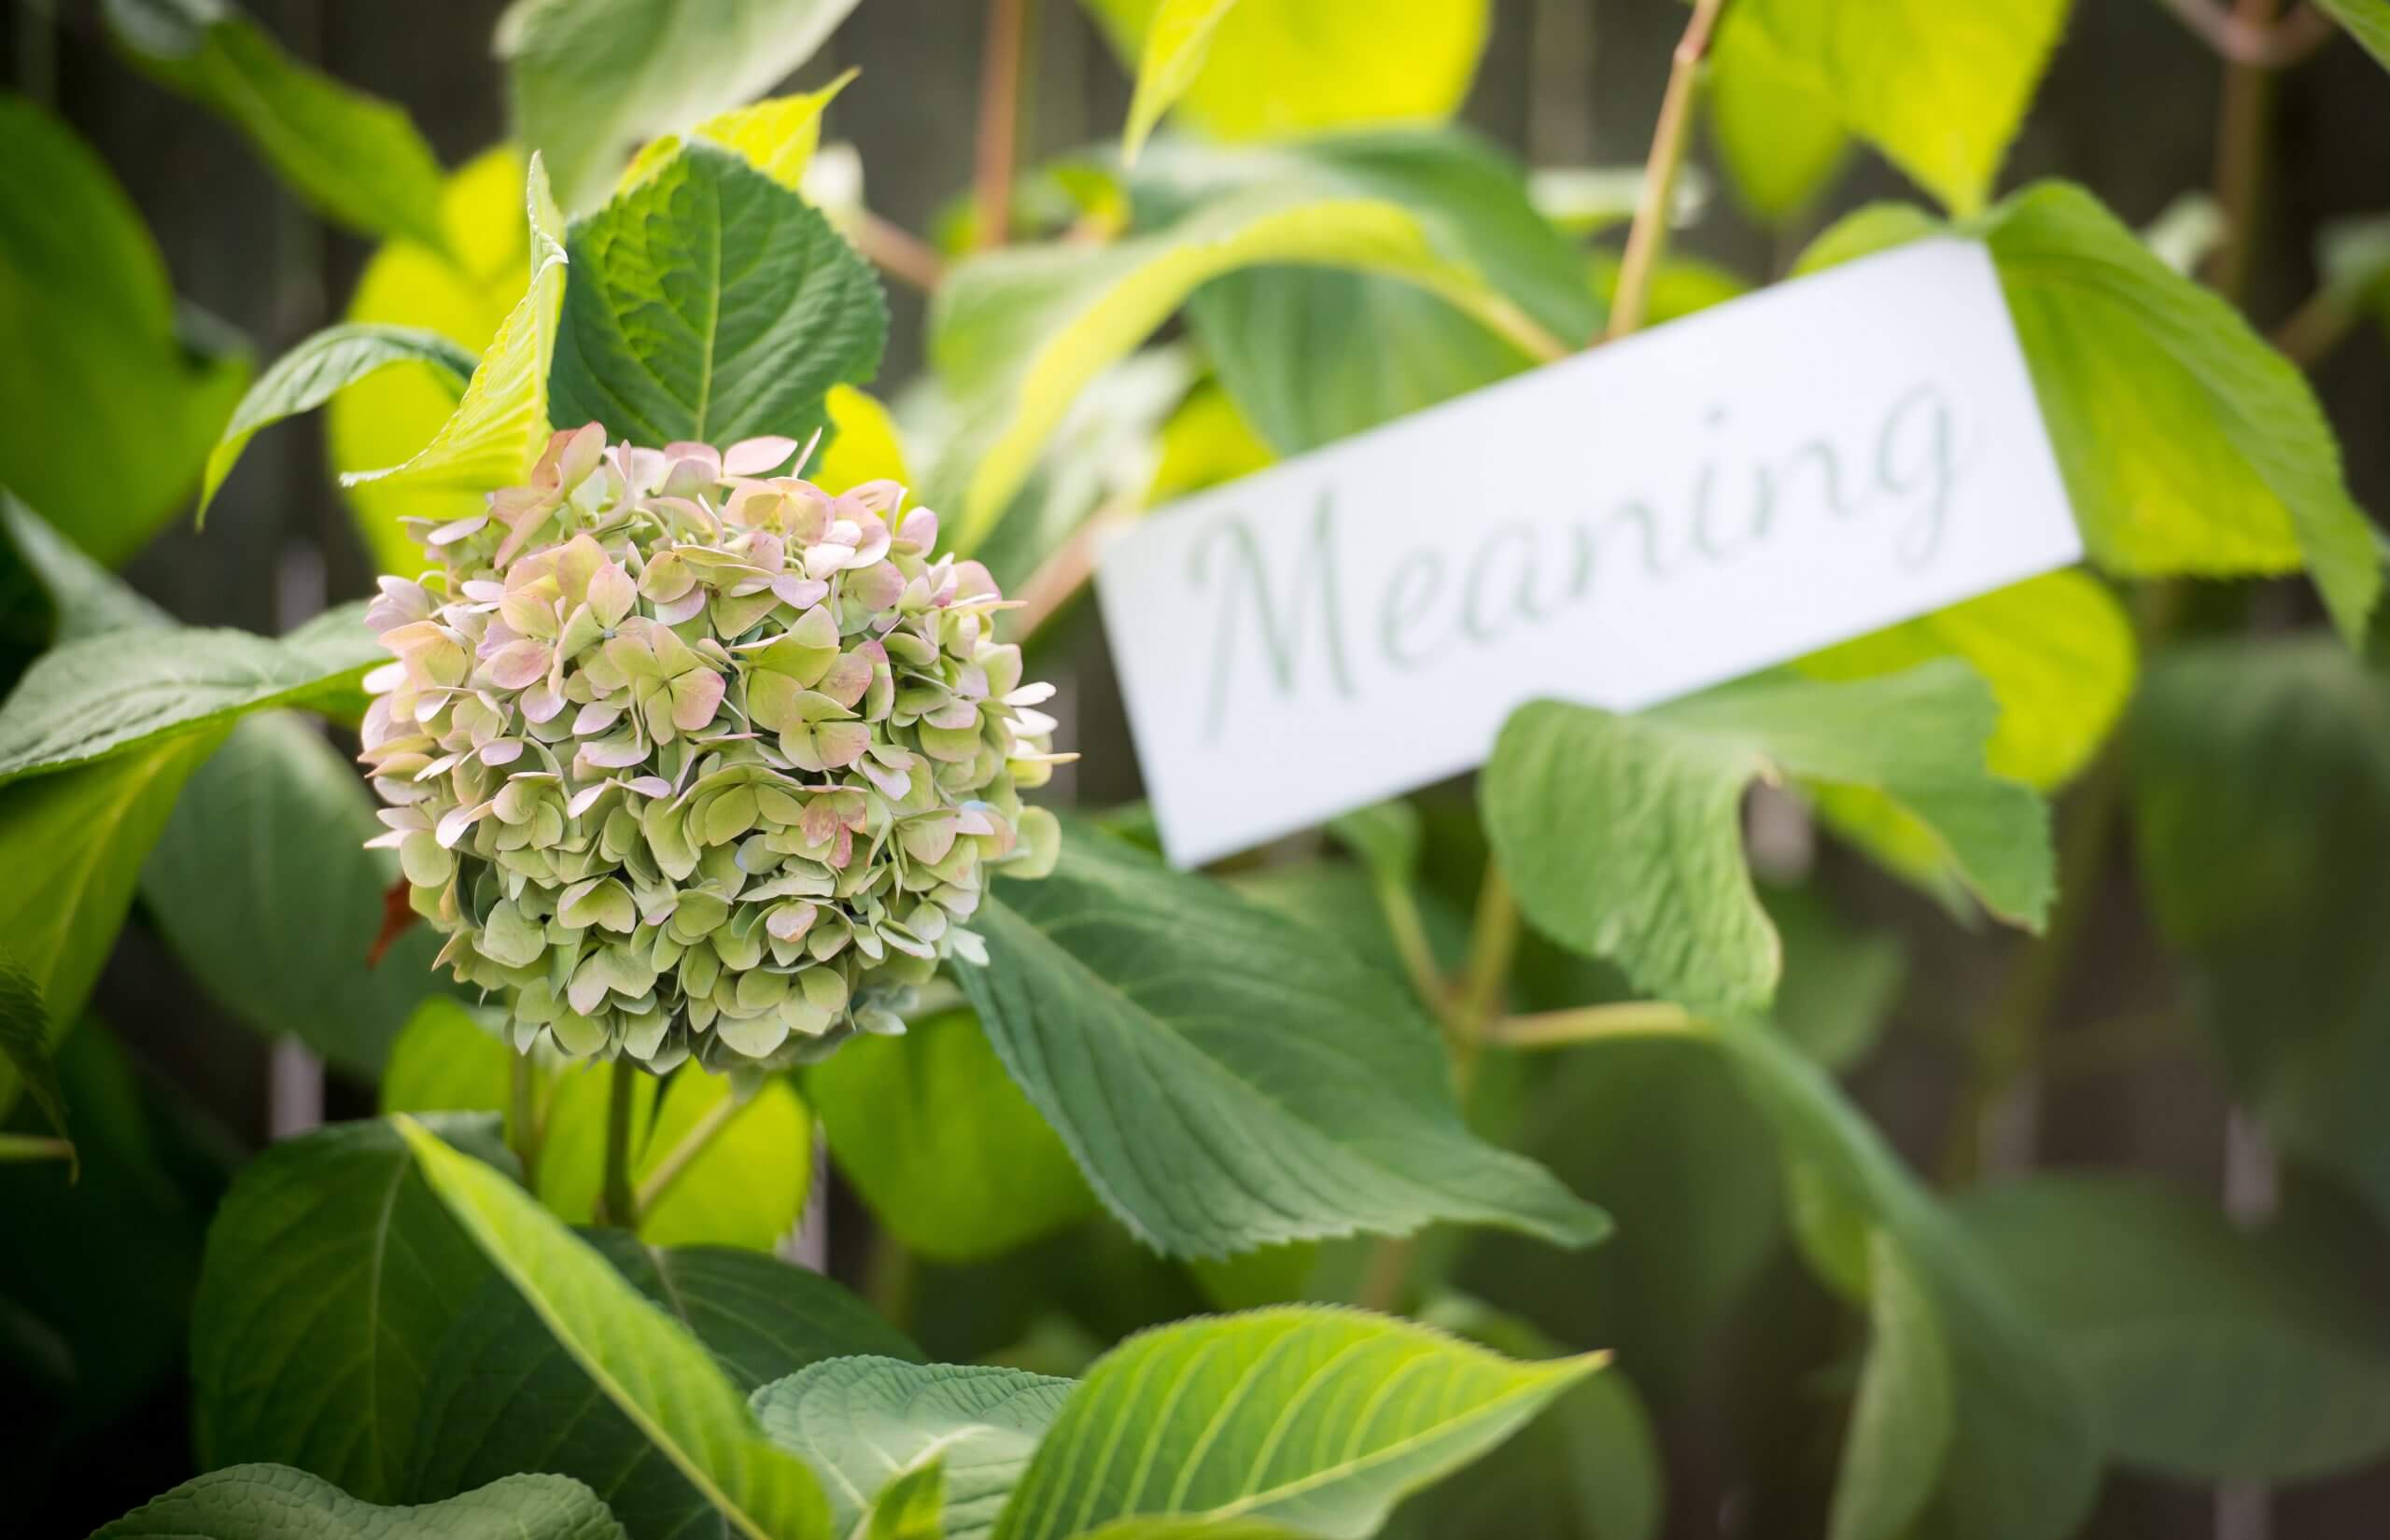 A focused view of a hydrangea flower in front of an unfocused view of a sign with the word 